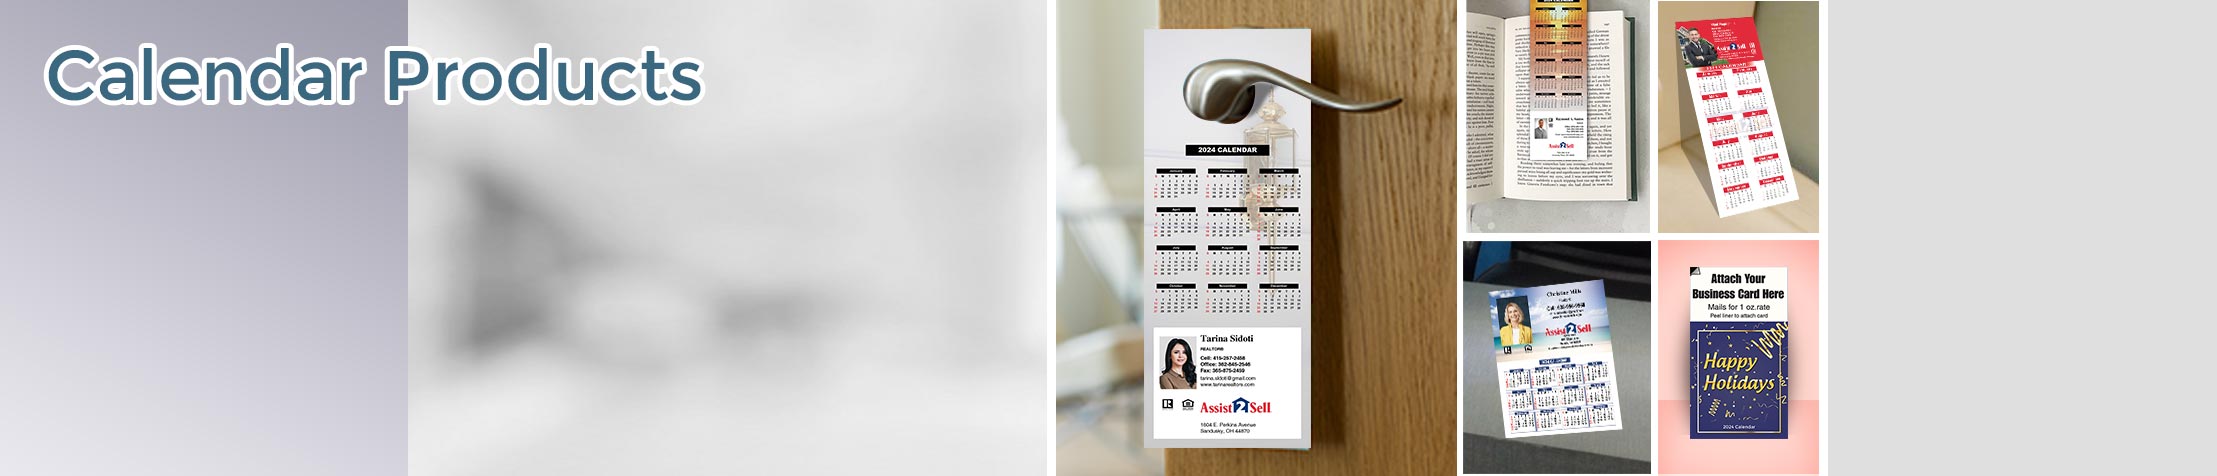 Assist2Sell Real Estate Calendar Products - Assist2Sell Real Estate  2019 calendars, magnets, door hangers, bookmarks, tear away note pads | BestPrintBuy.com